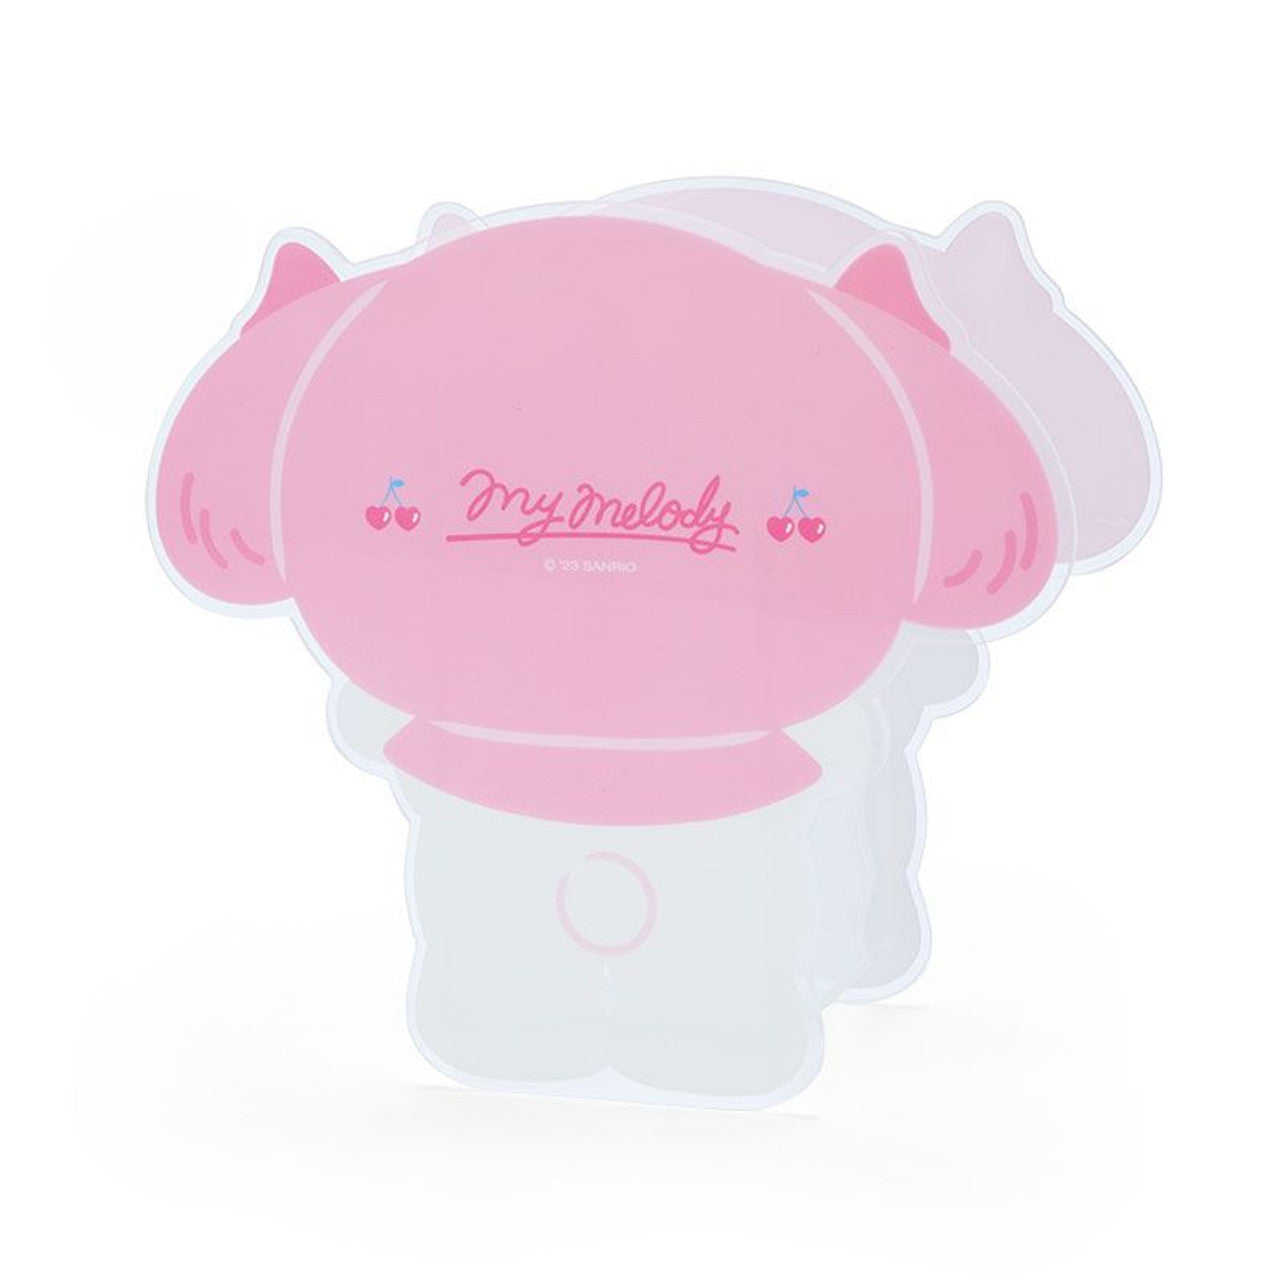 Sanrio Characters Die-Cut Acrylic Pen Stand Pencil Holder (My Melody - 835102)